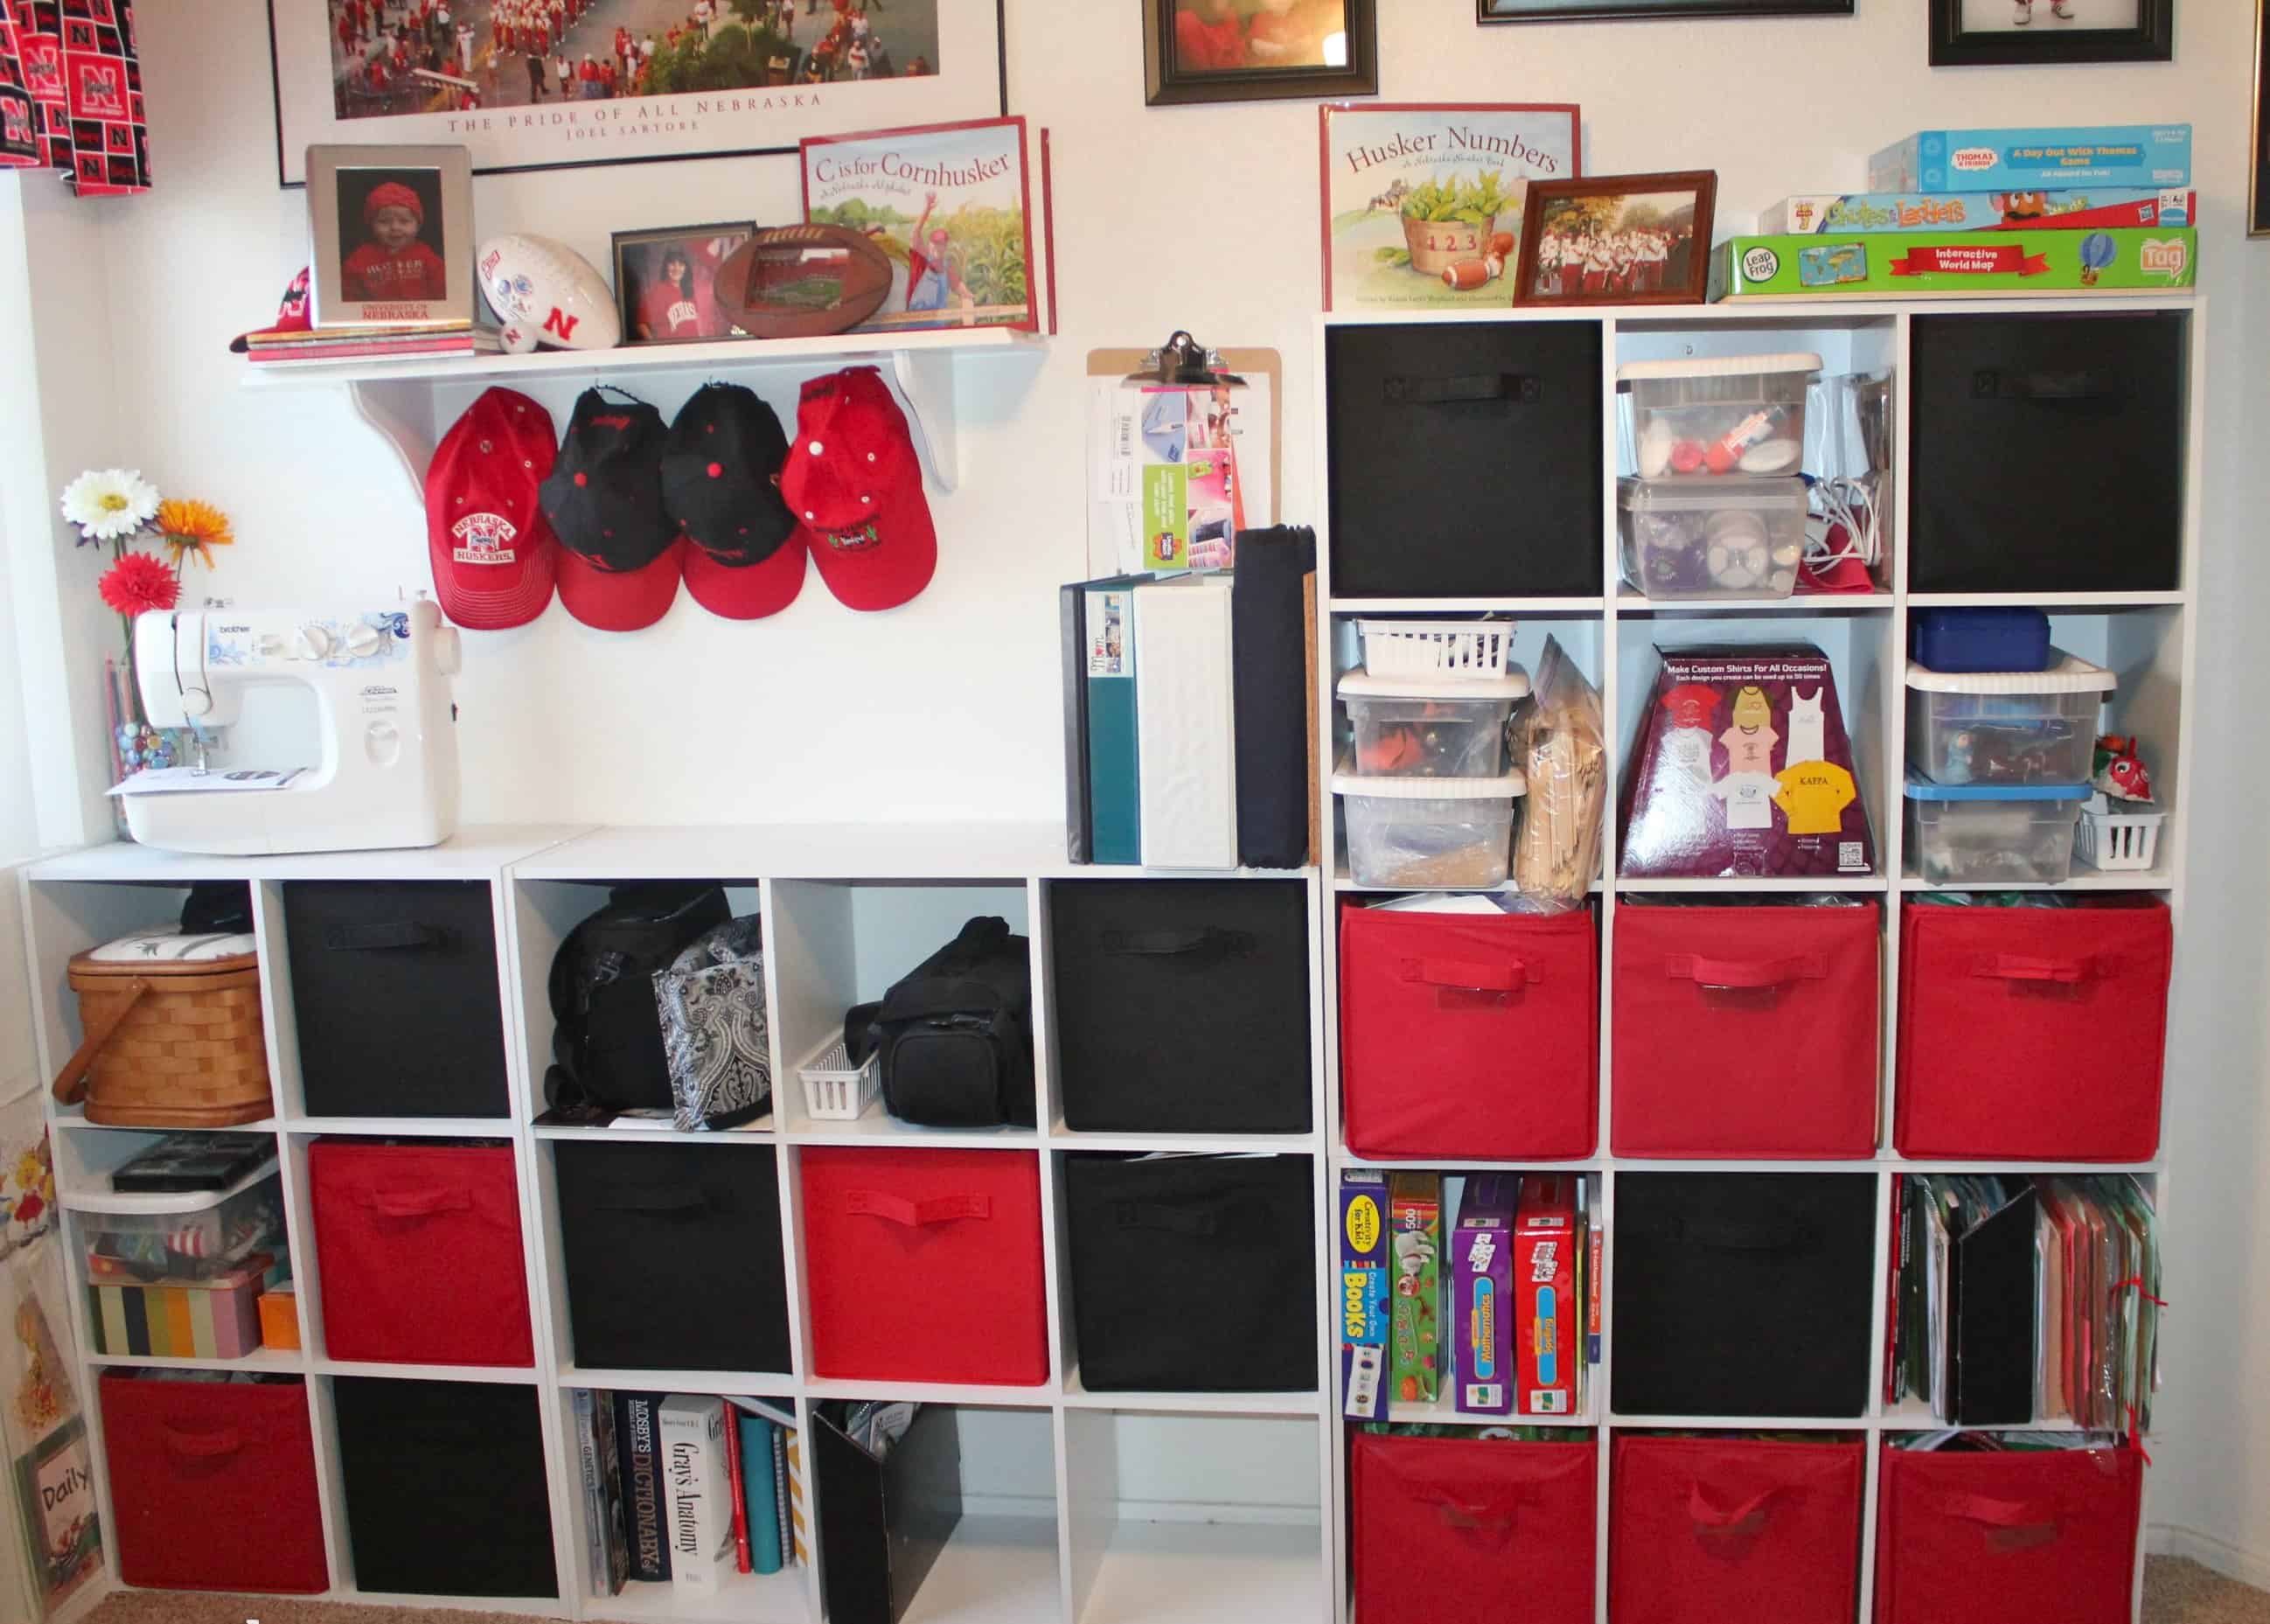 Cubby shelving with insert drawers